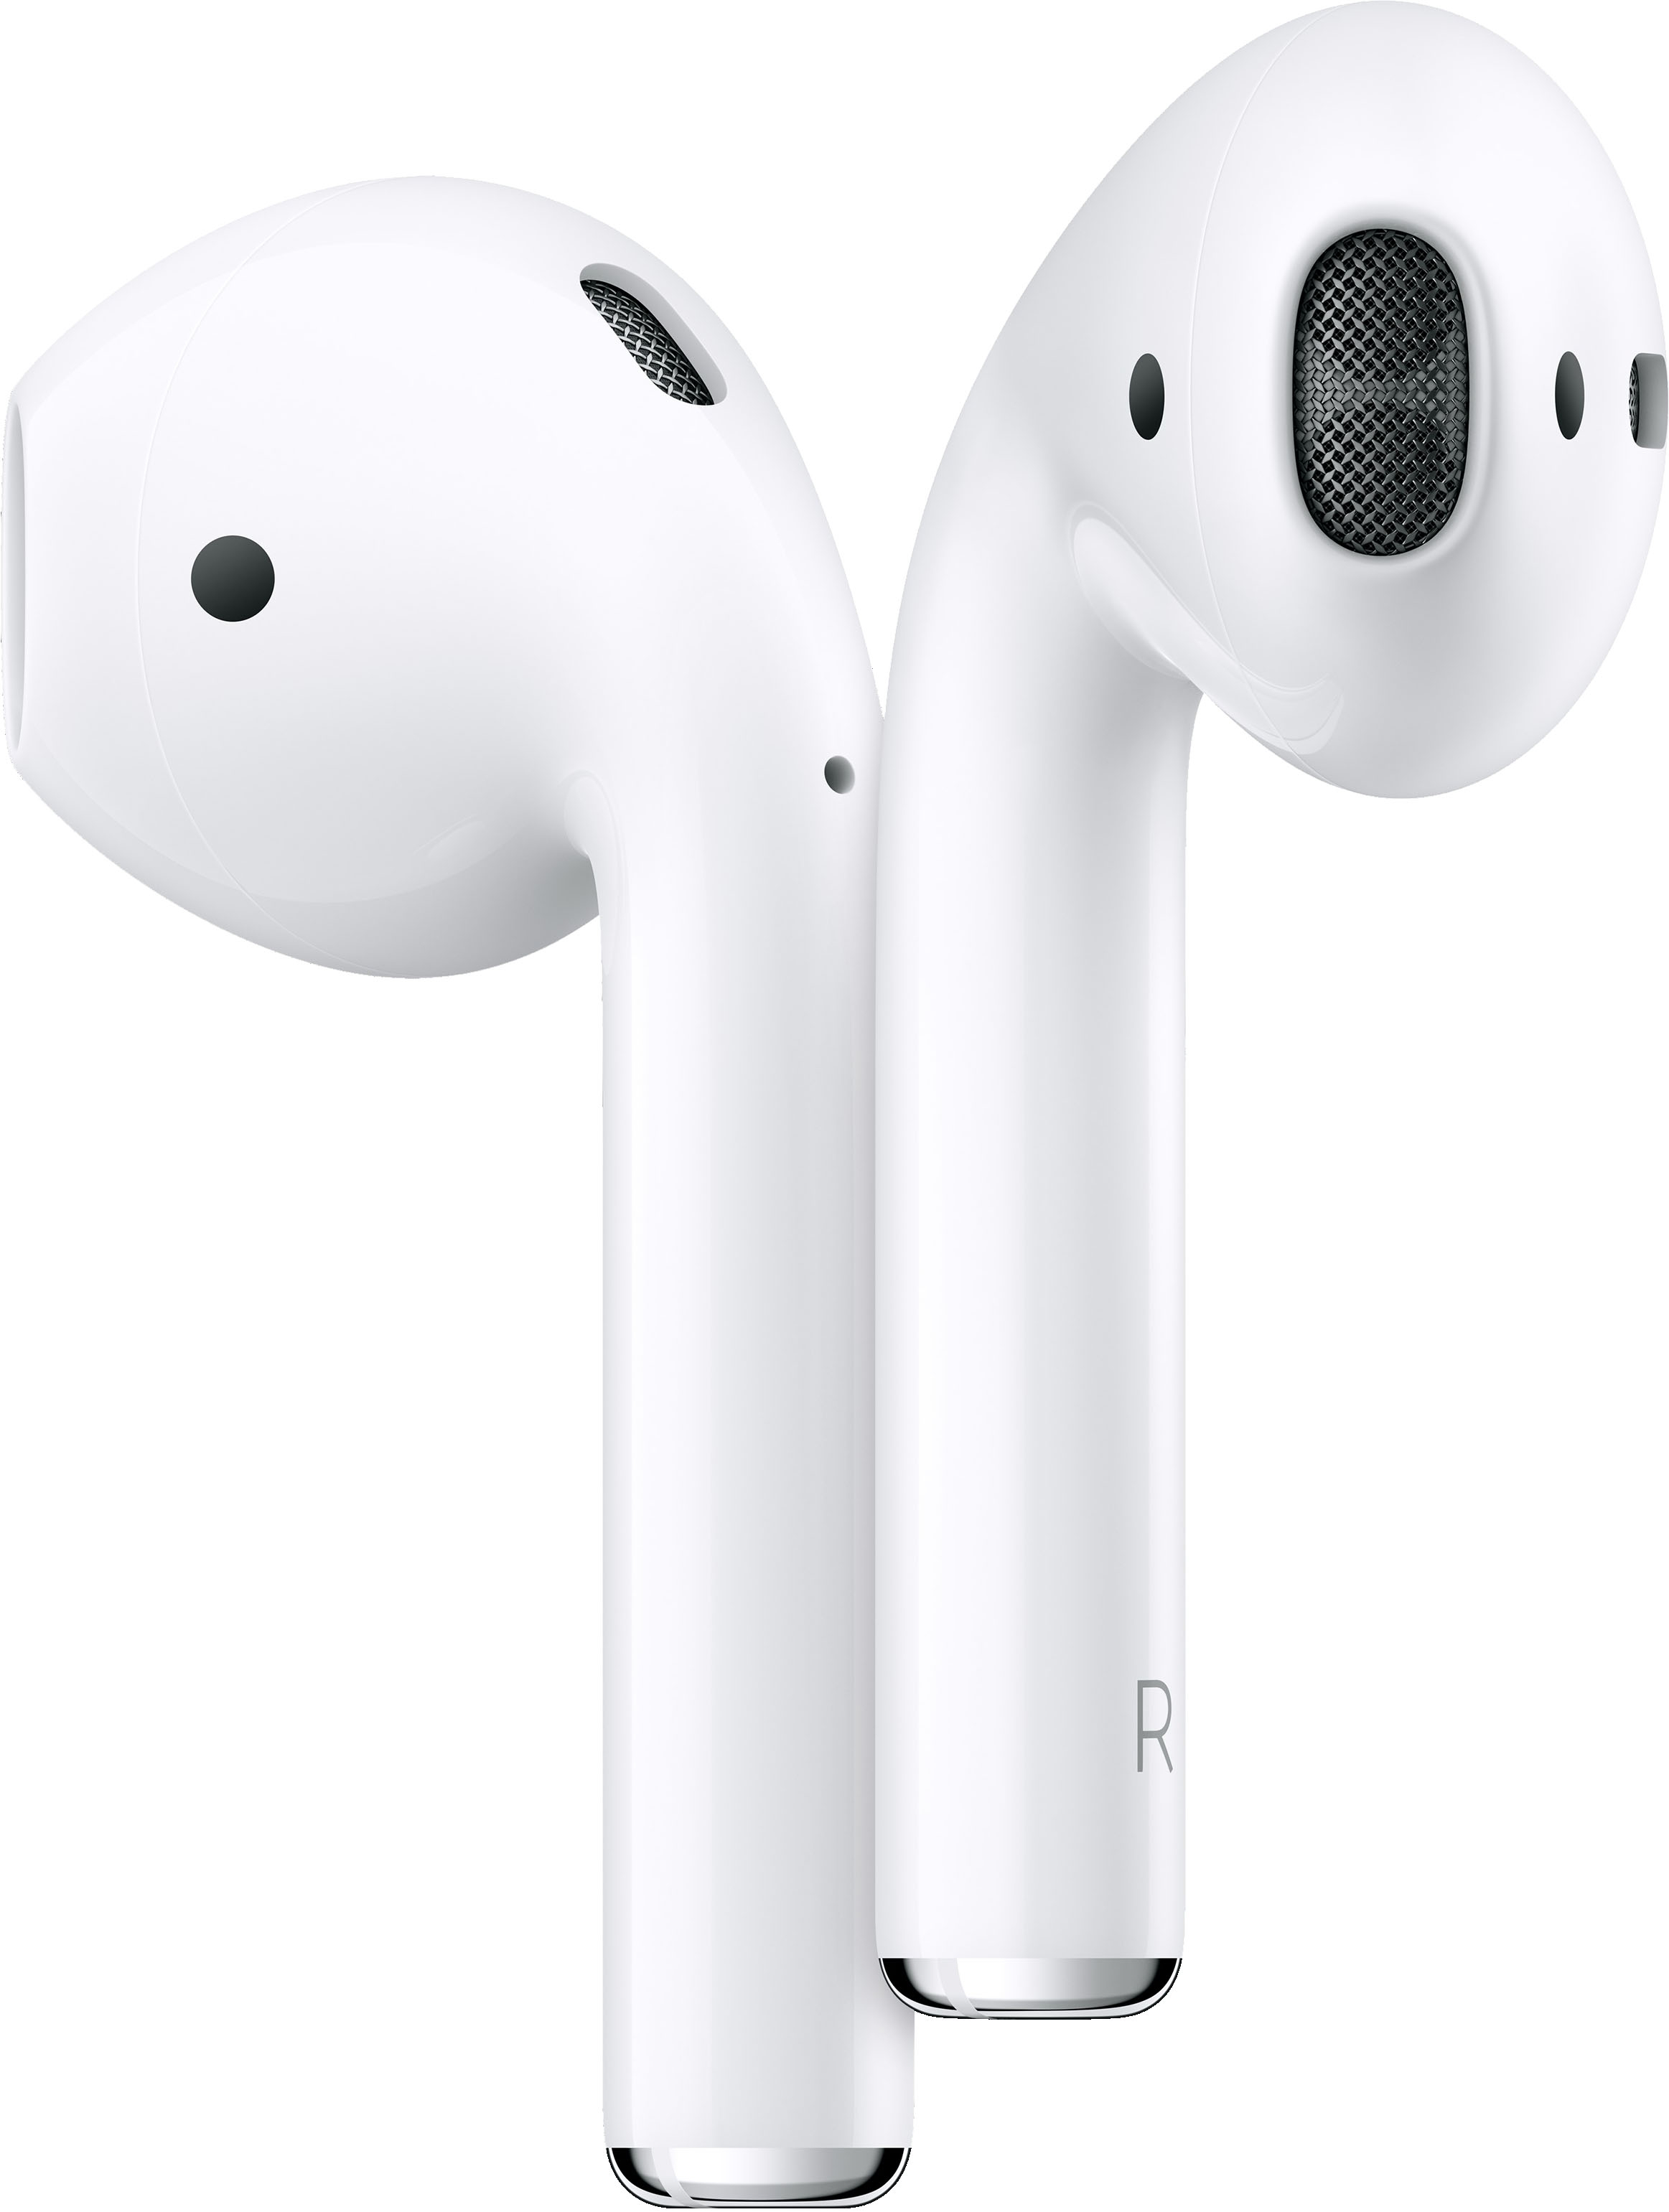 Apple - Airpods with Wireless Charging Case - White